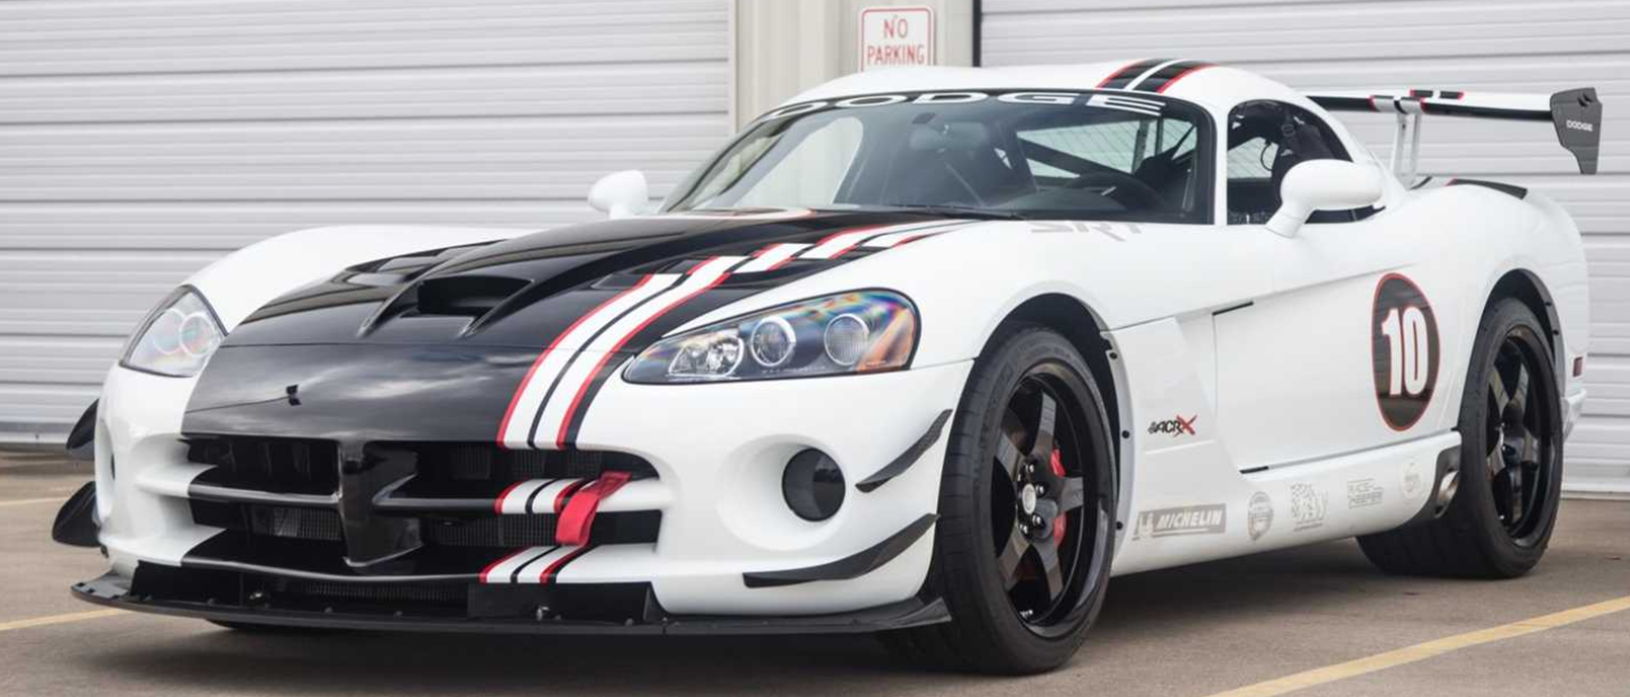 2010 Dodge Viper ACR-X With Only 10 Miles